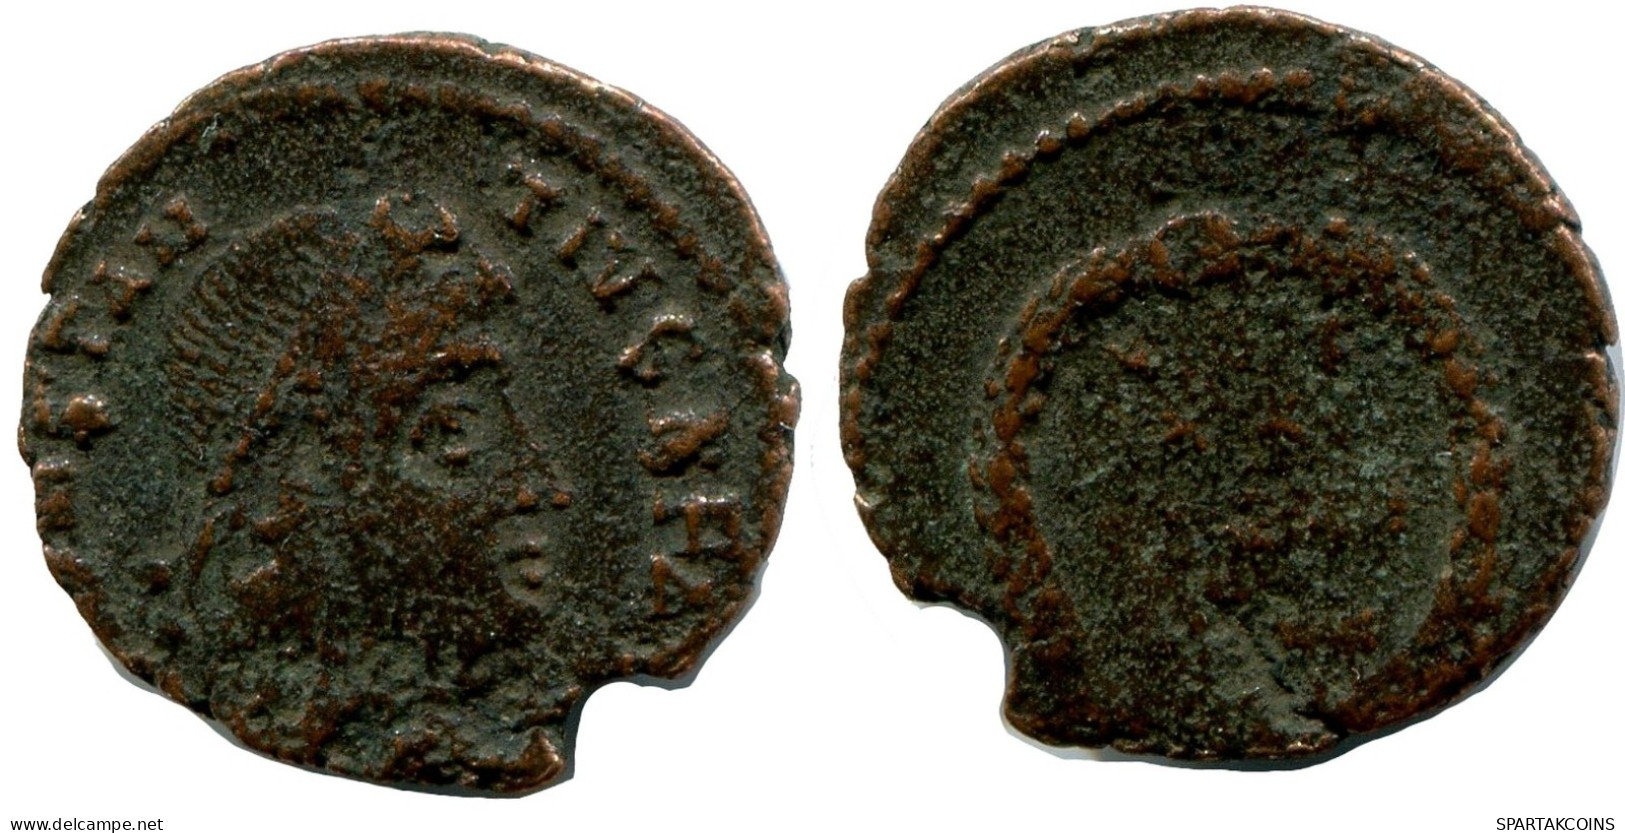 CONSTANTIUS II MINT UNCERTAIN FROM THE ROYAL ONTARIO MUSEUM #ANC10052.14.F.A - El Imperio Christiano (307 / 363)